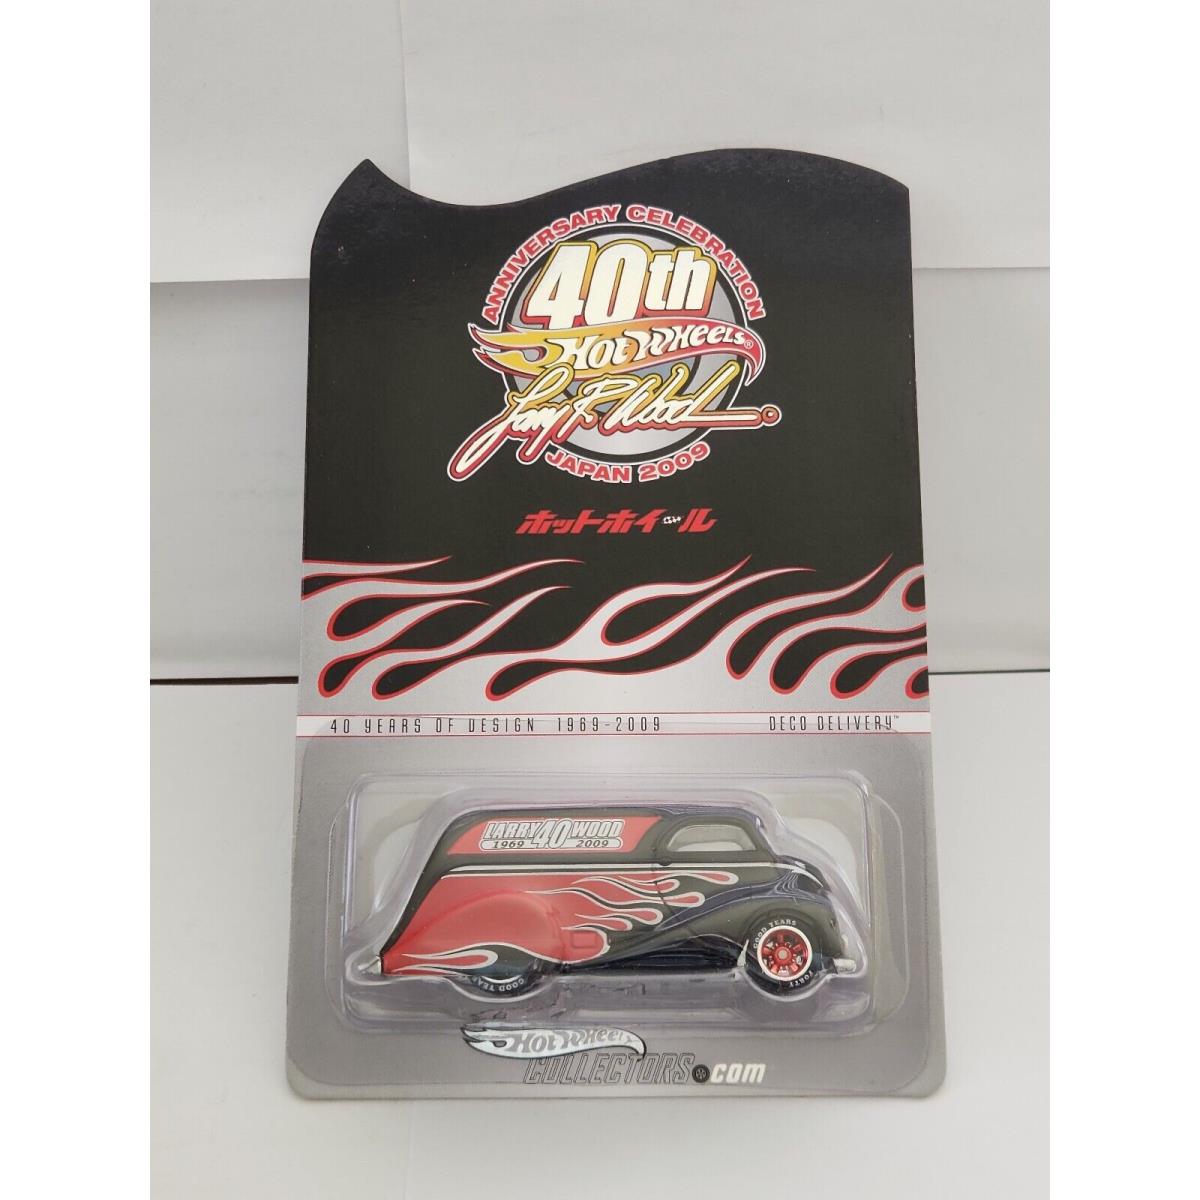 2009 Hot Wheels 40 Years of Larry Wood Design Japan Deco Delivery 761/4000 N76